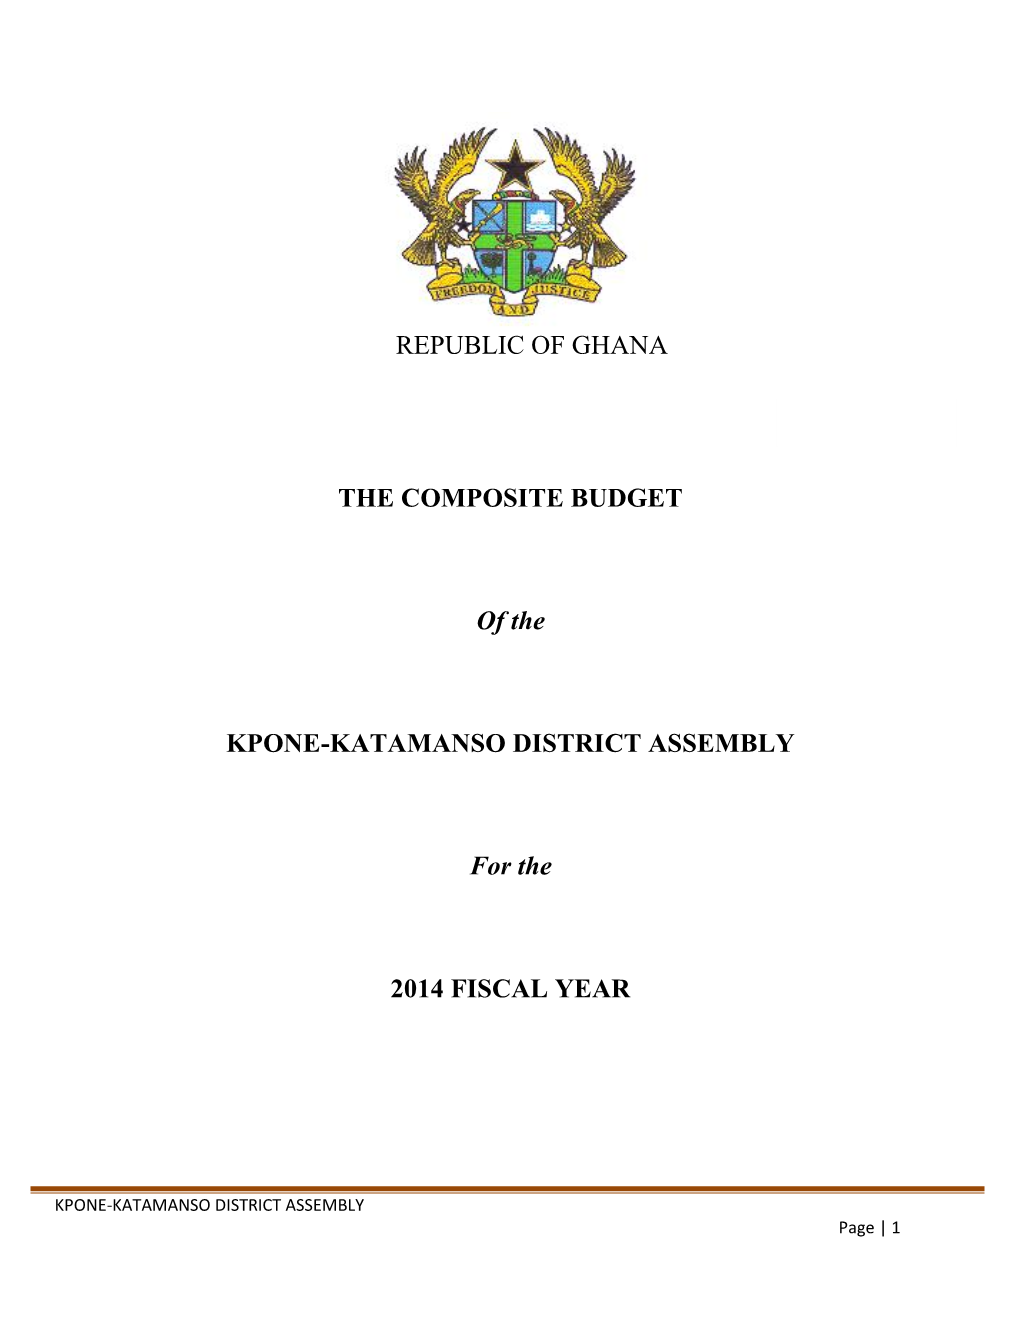 Kpone Katamanso Composite Budget Is Therefore Prepared from the 2014 Annual Action Plan Was from the DMTDP and NMTDPF